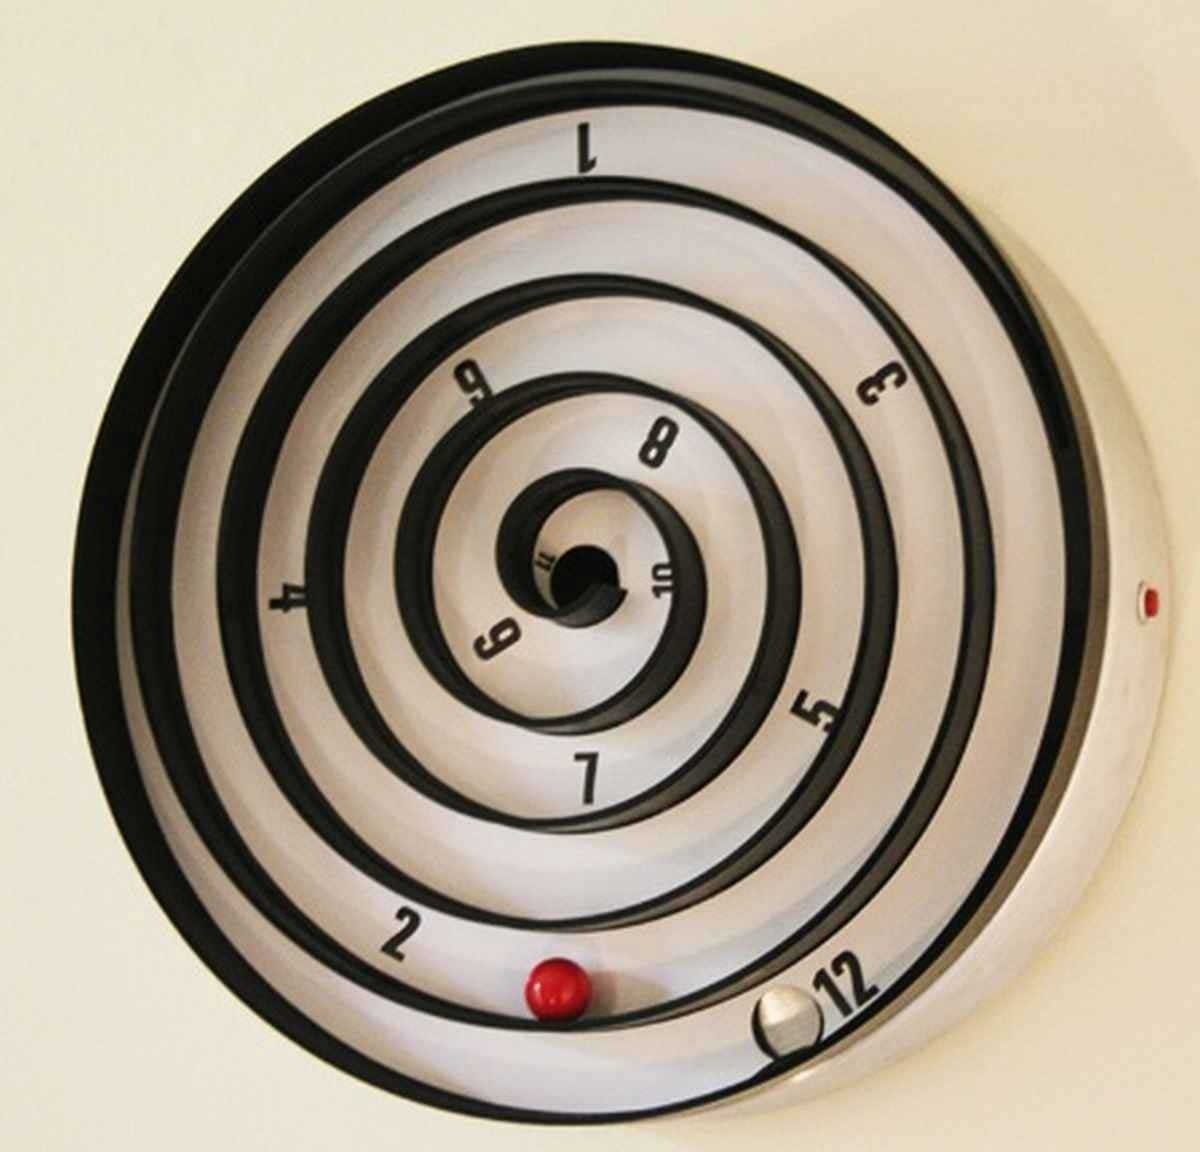 Choose cool wall clocks that suit your decor